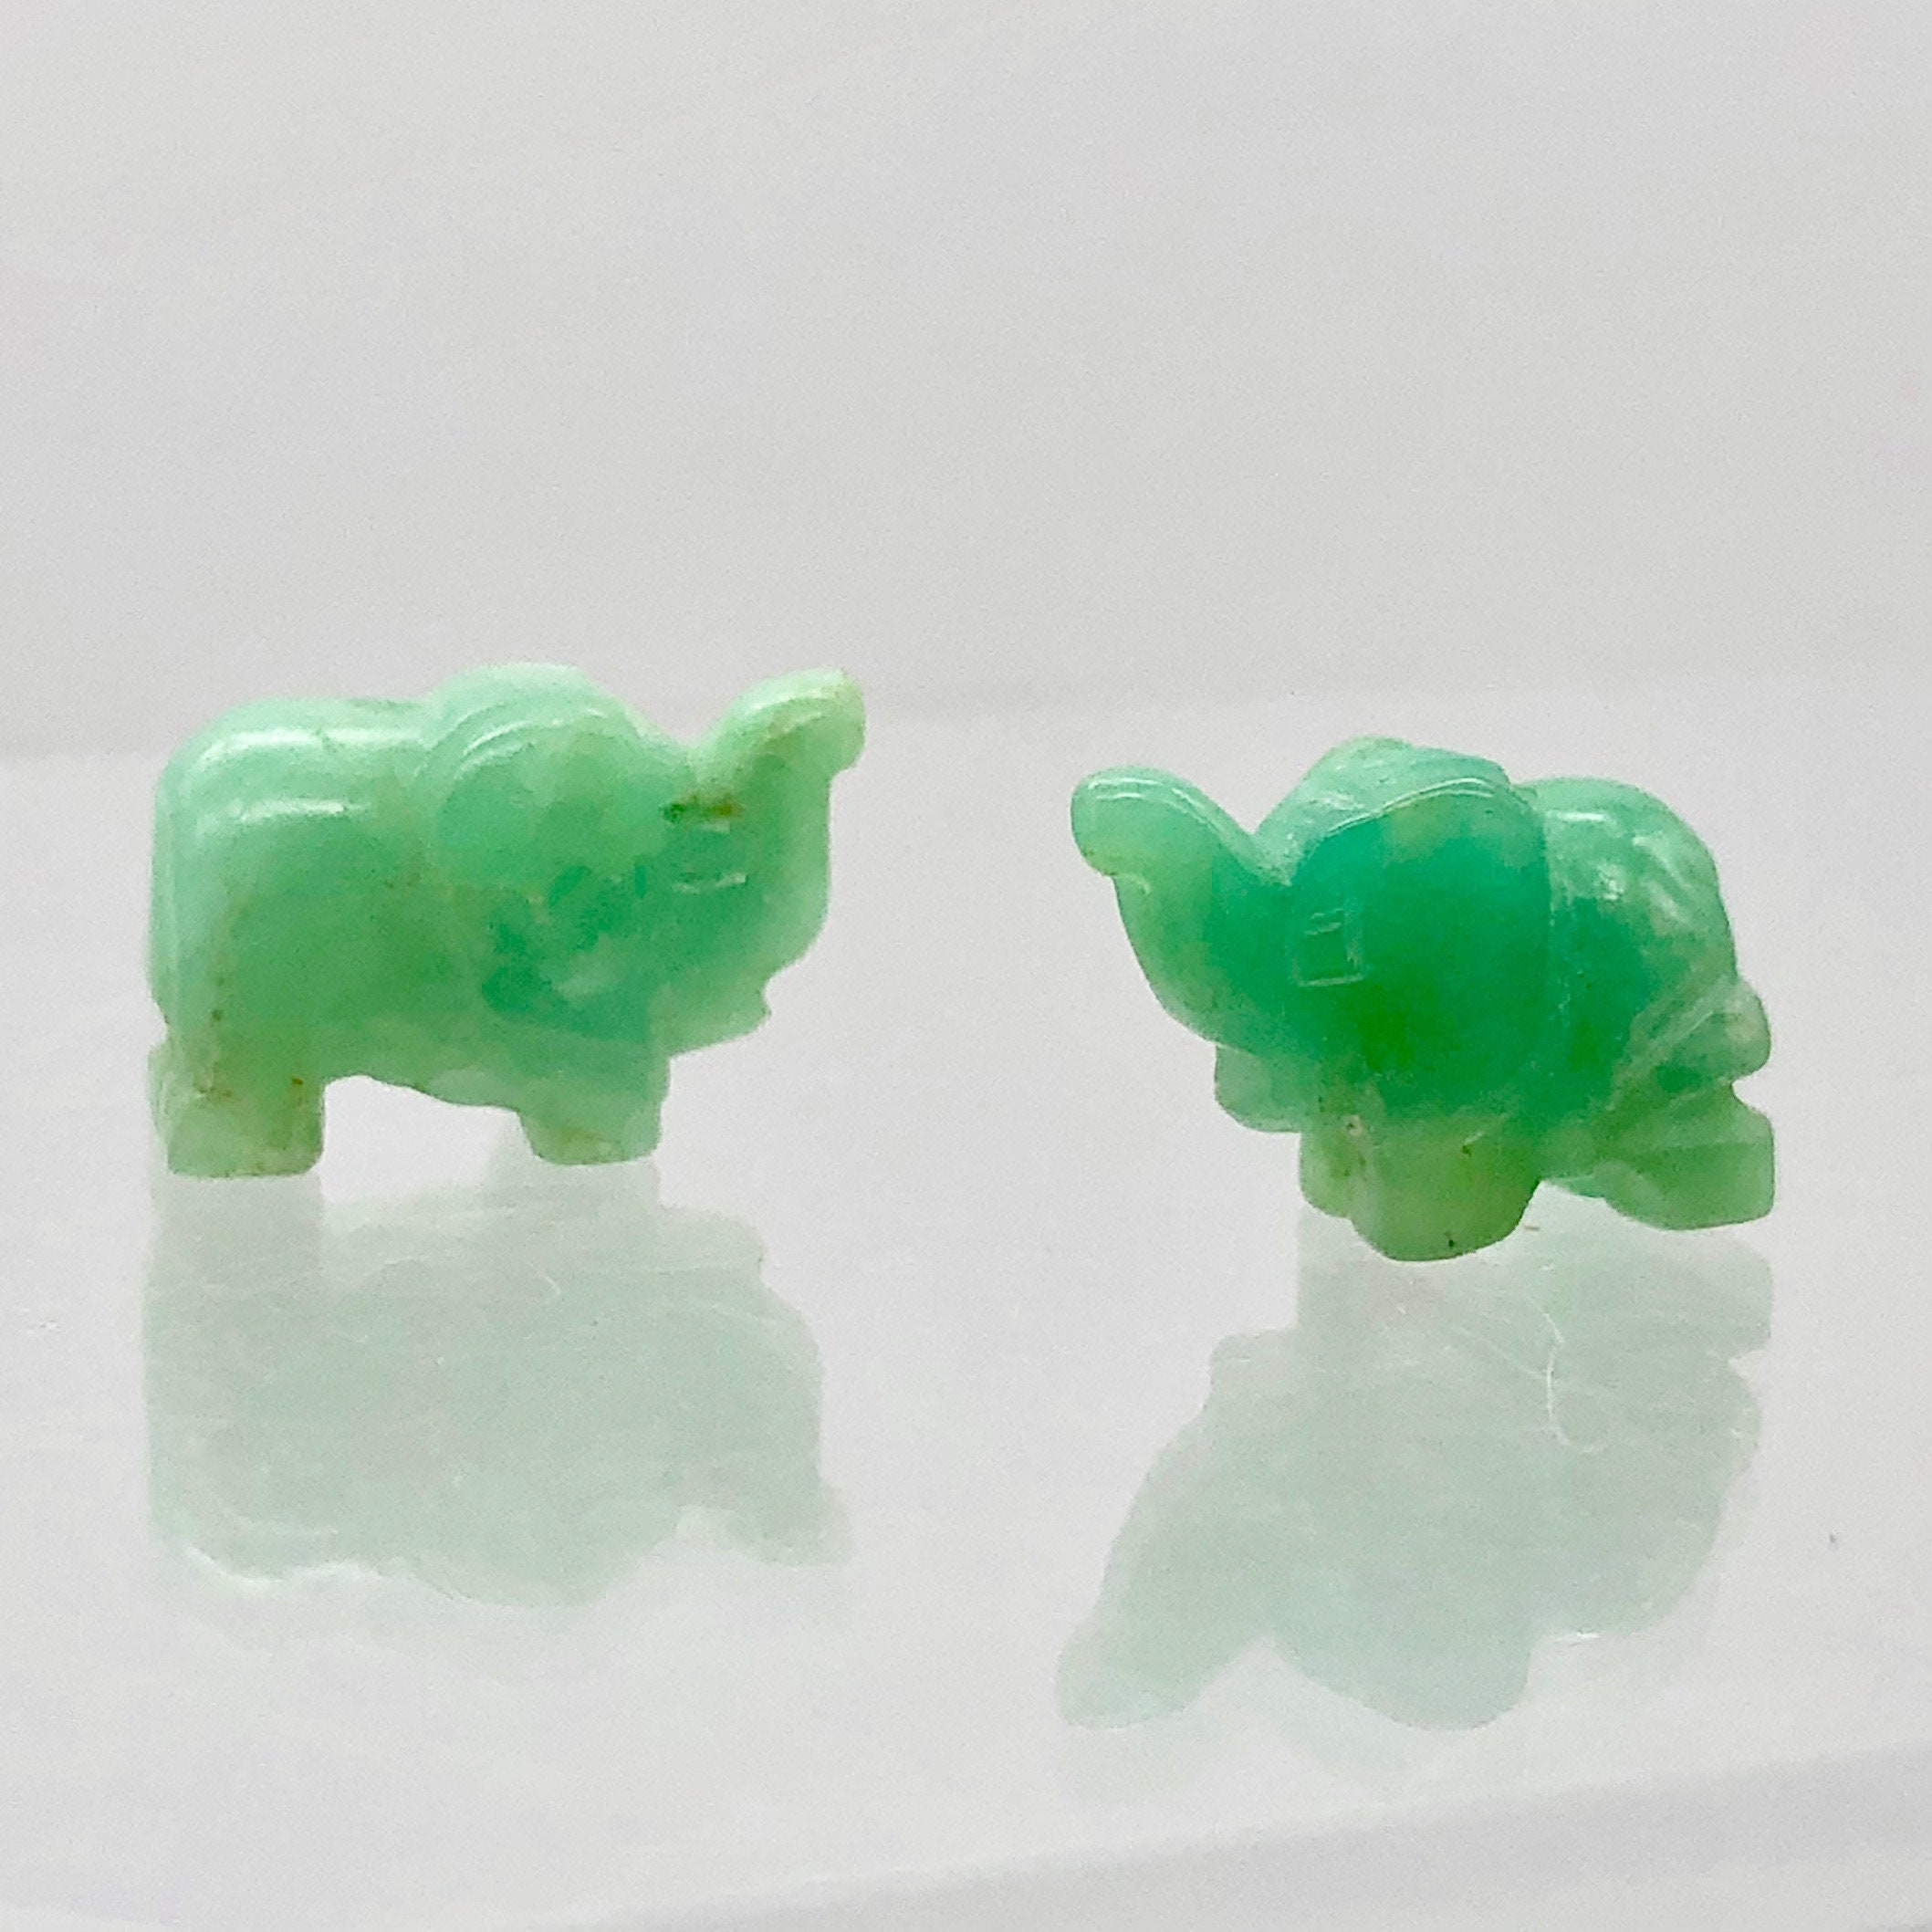 Cute 2 Chrysoprase Carved Elephant Beads 15x10x7mm | Etsy